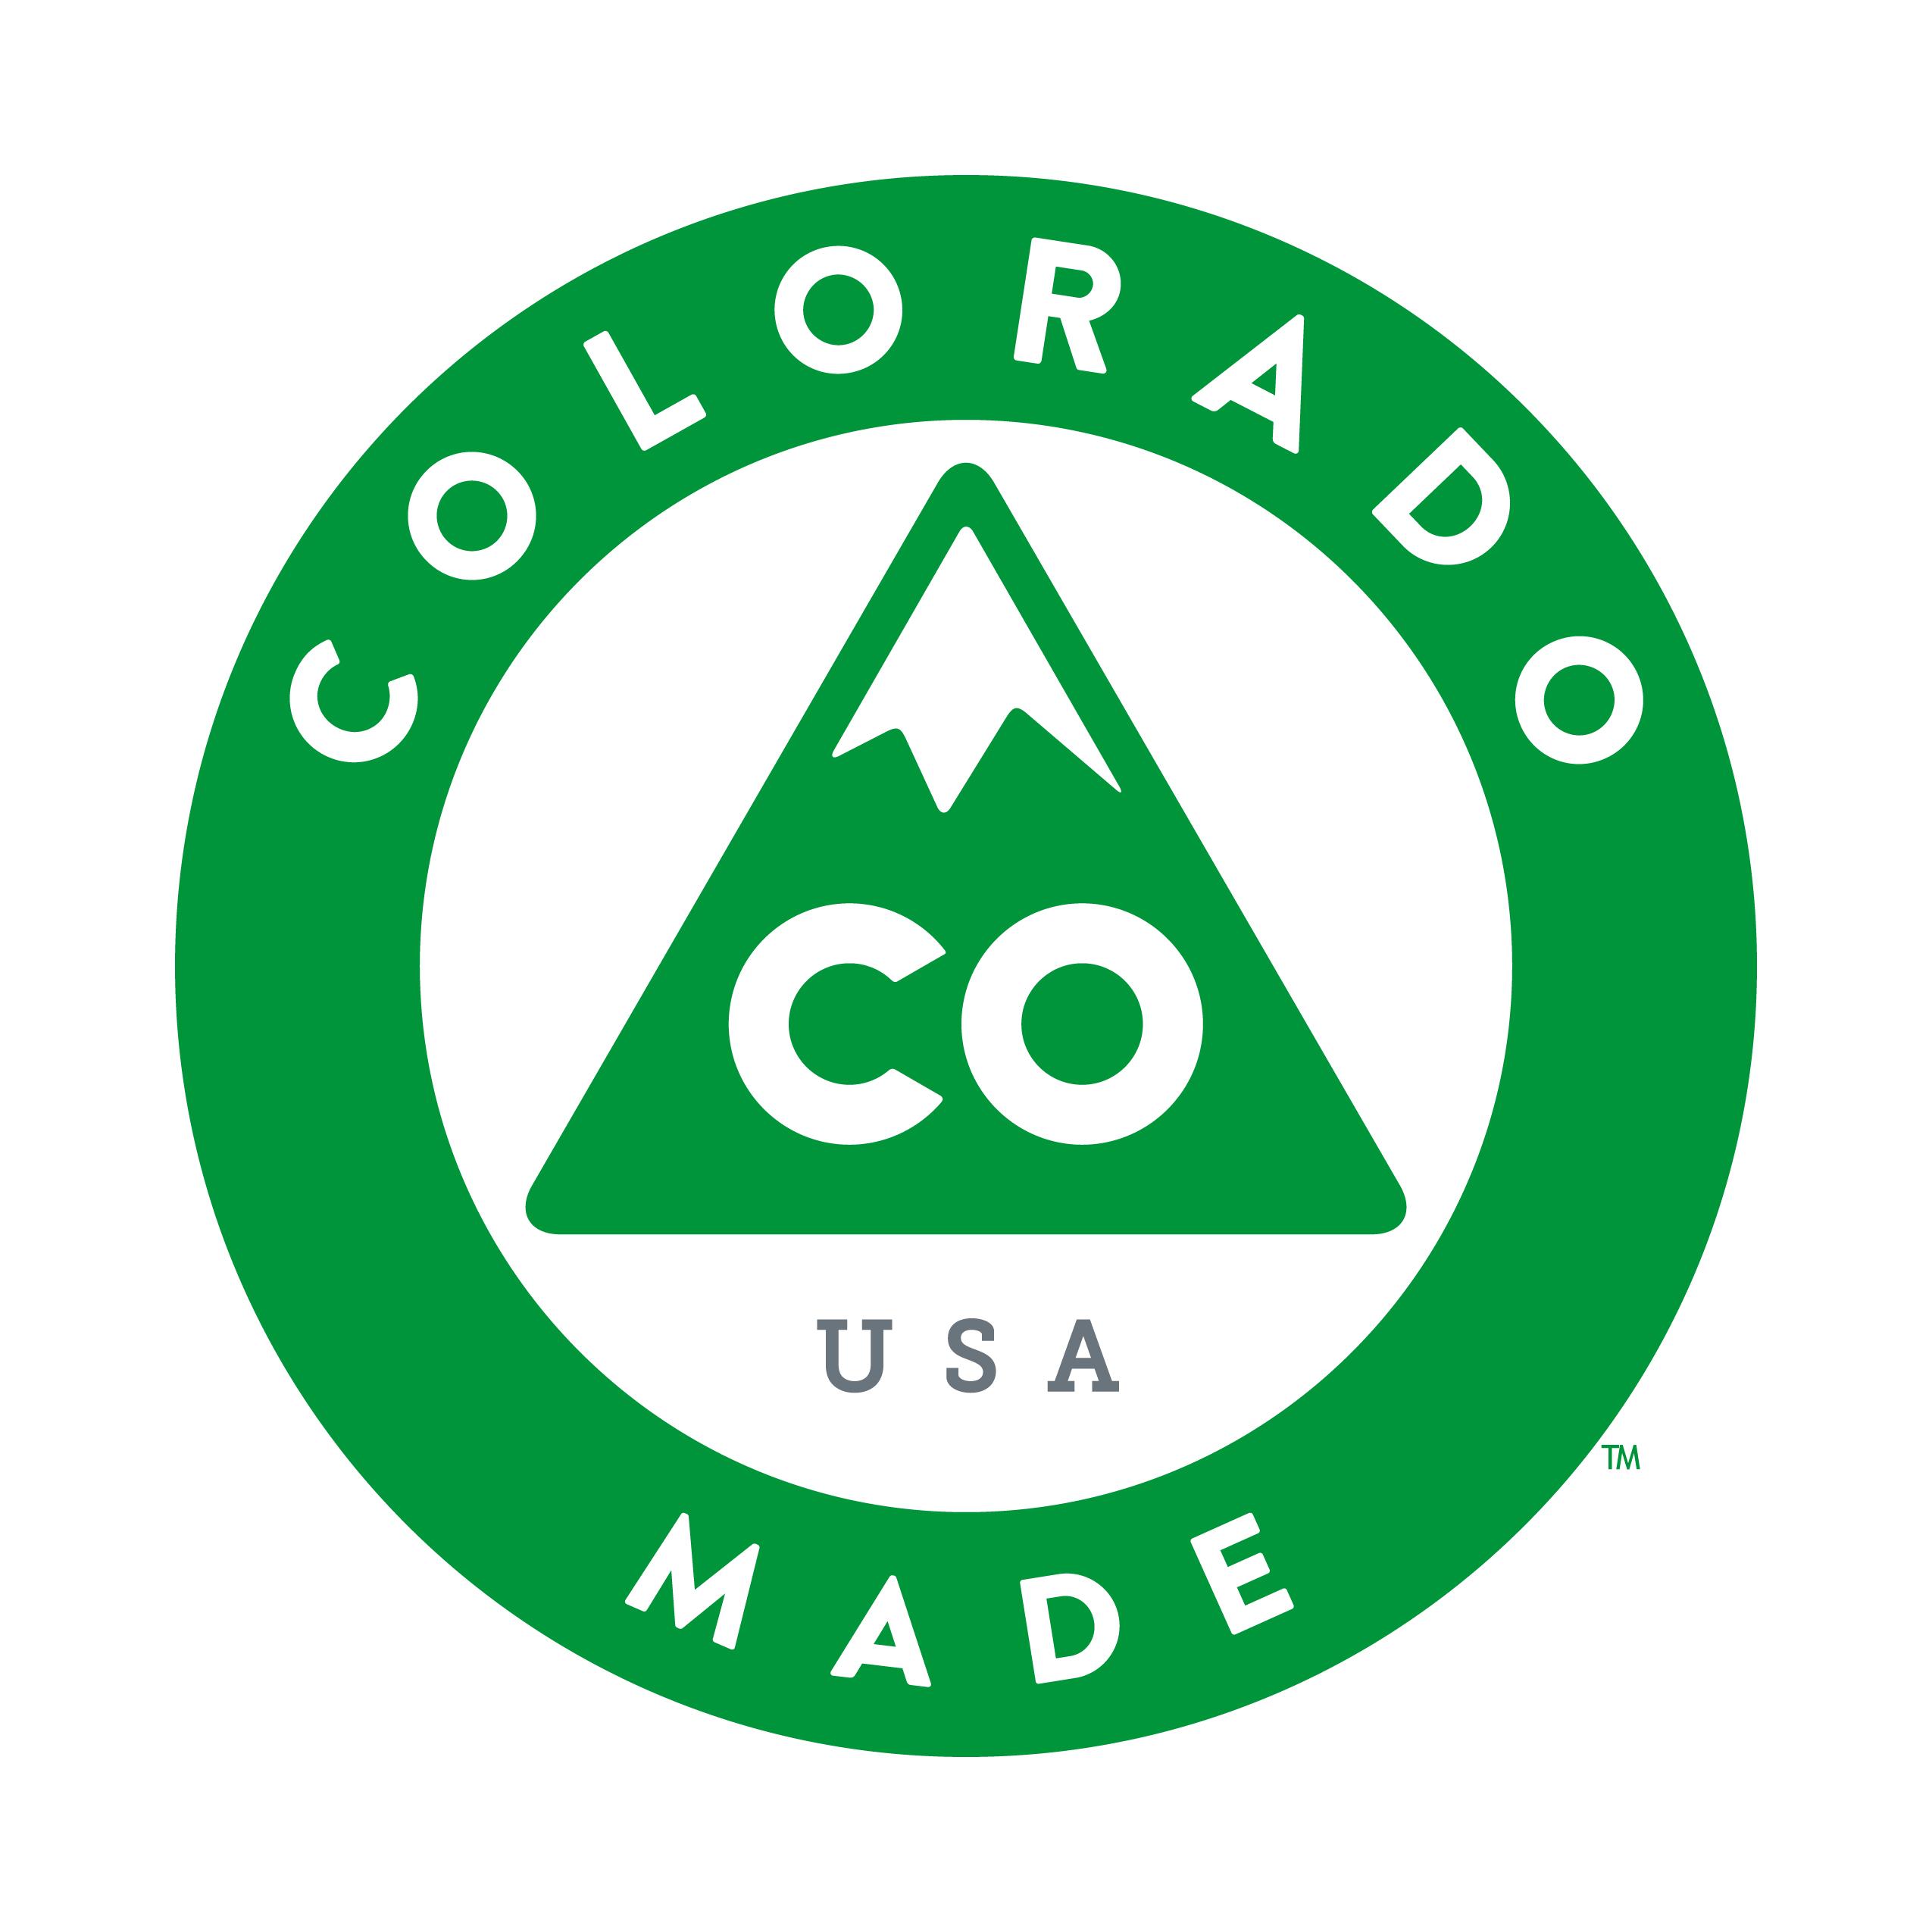 Colorado Corporate Logo - About Us - Learn about EarthRoamer as a company.